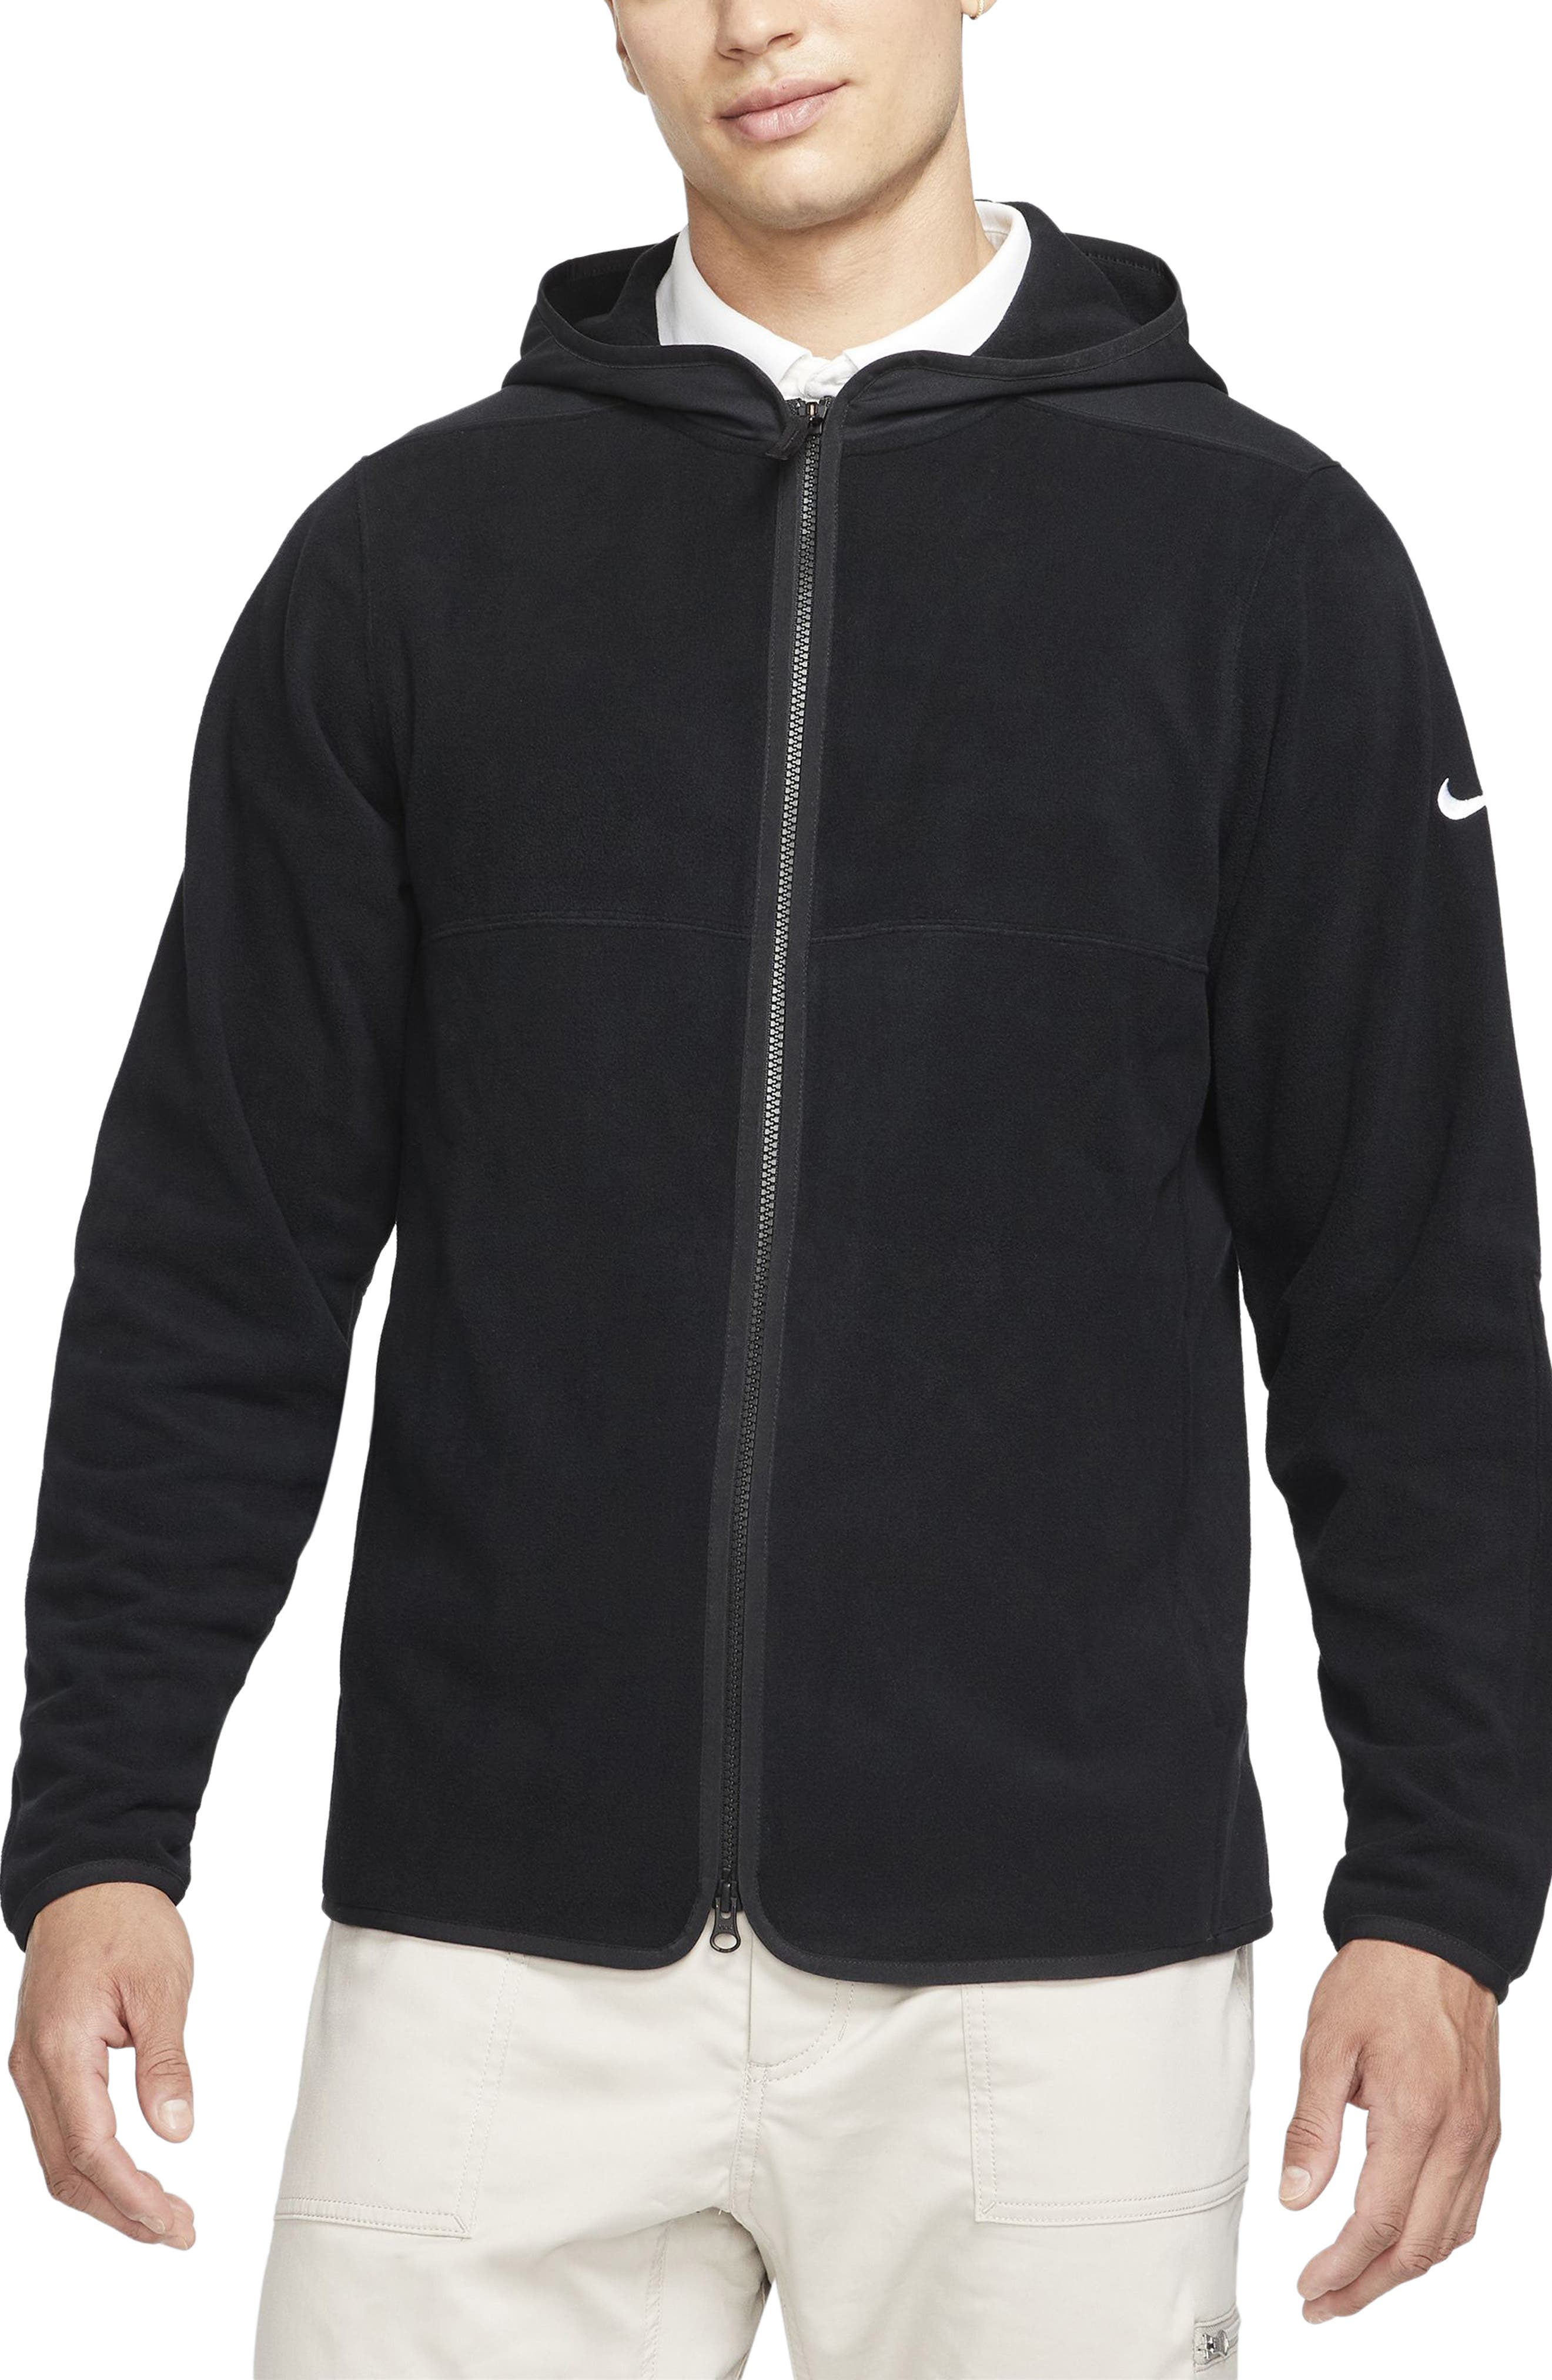 UPC 195240001242 product image for Nike Golf Nike Therma-FIT Victory Zip Golf Hoodie in Black/Black/Black/White at  | upcitemdb.com